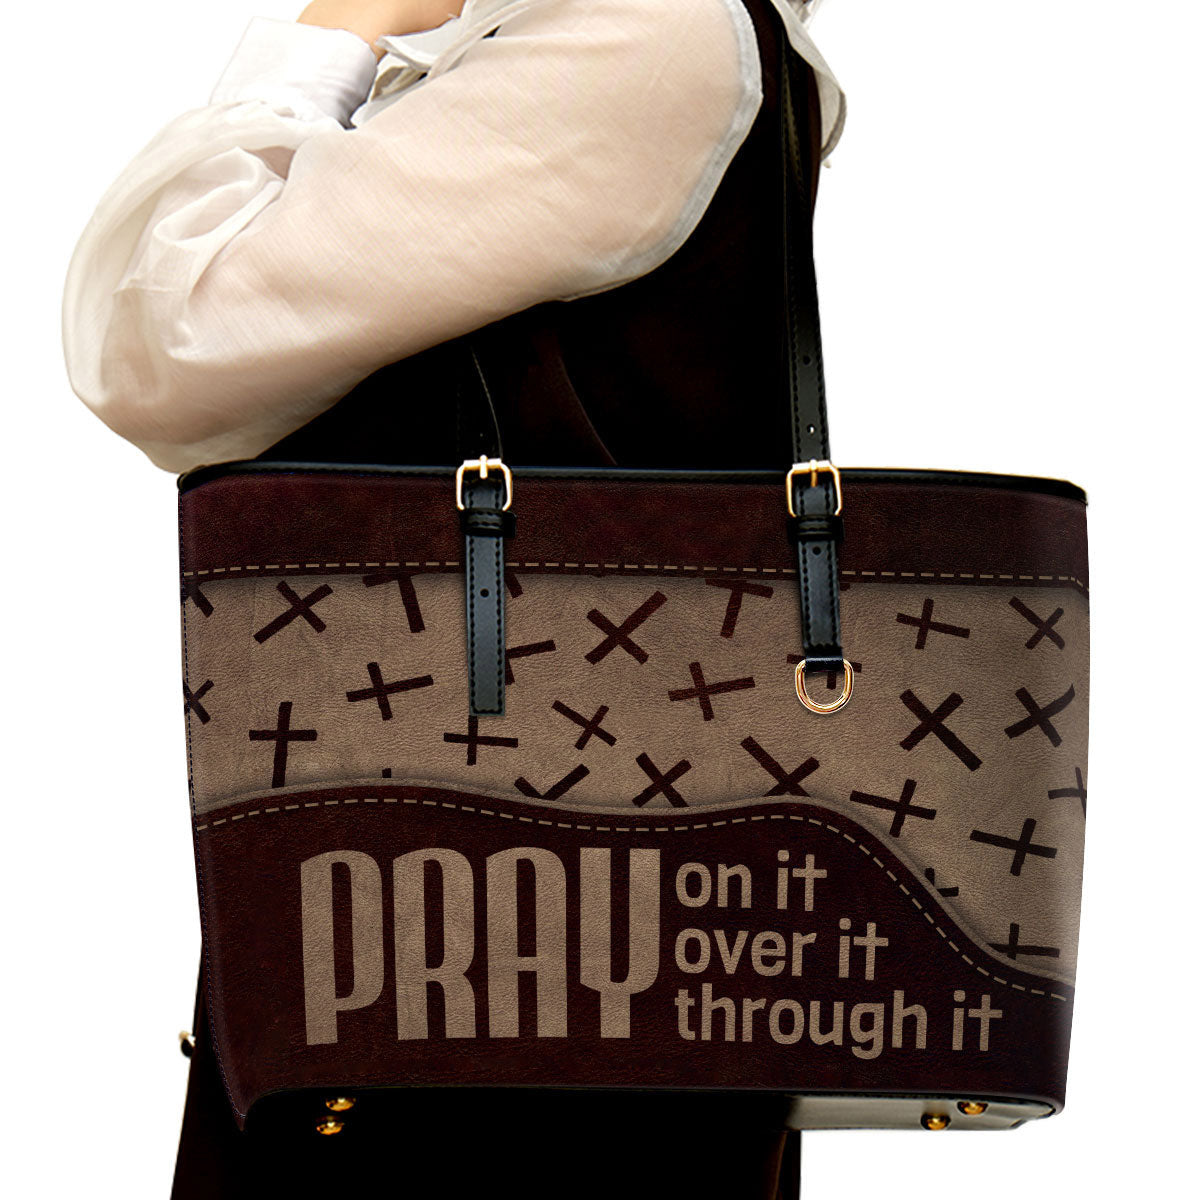 Pray On It Pray Over It Pray Through It Large Leather Tote Bag - Christ Gifts For Religious Women - Best Mother's Day Gifts